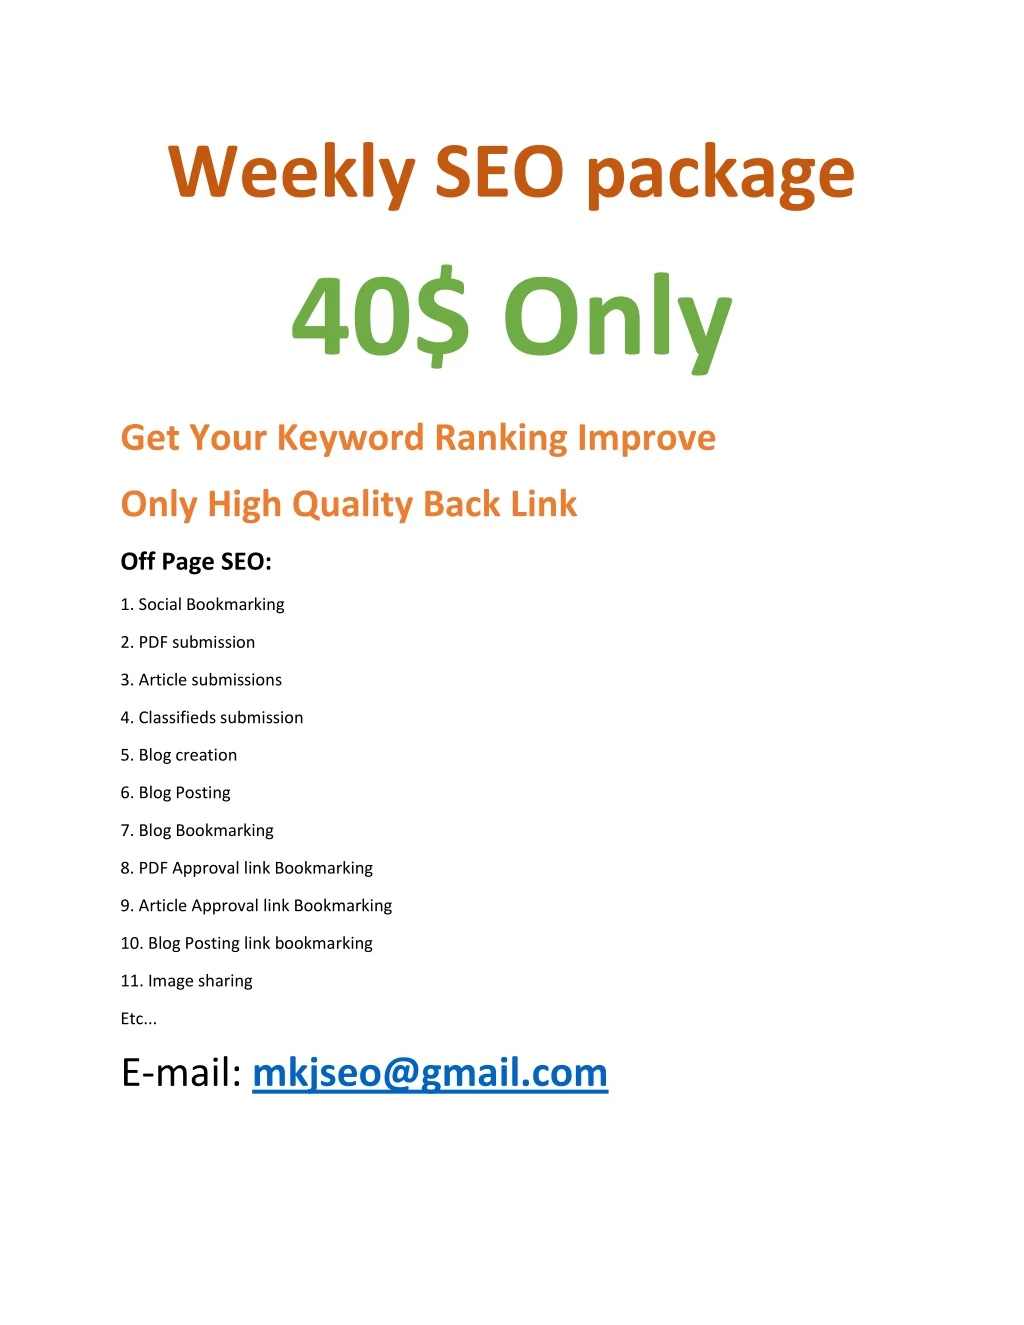 weekly seo package 40 only